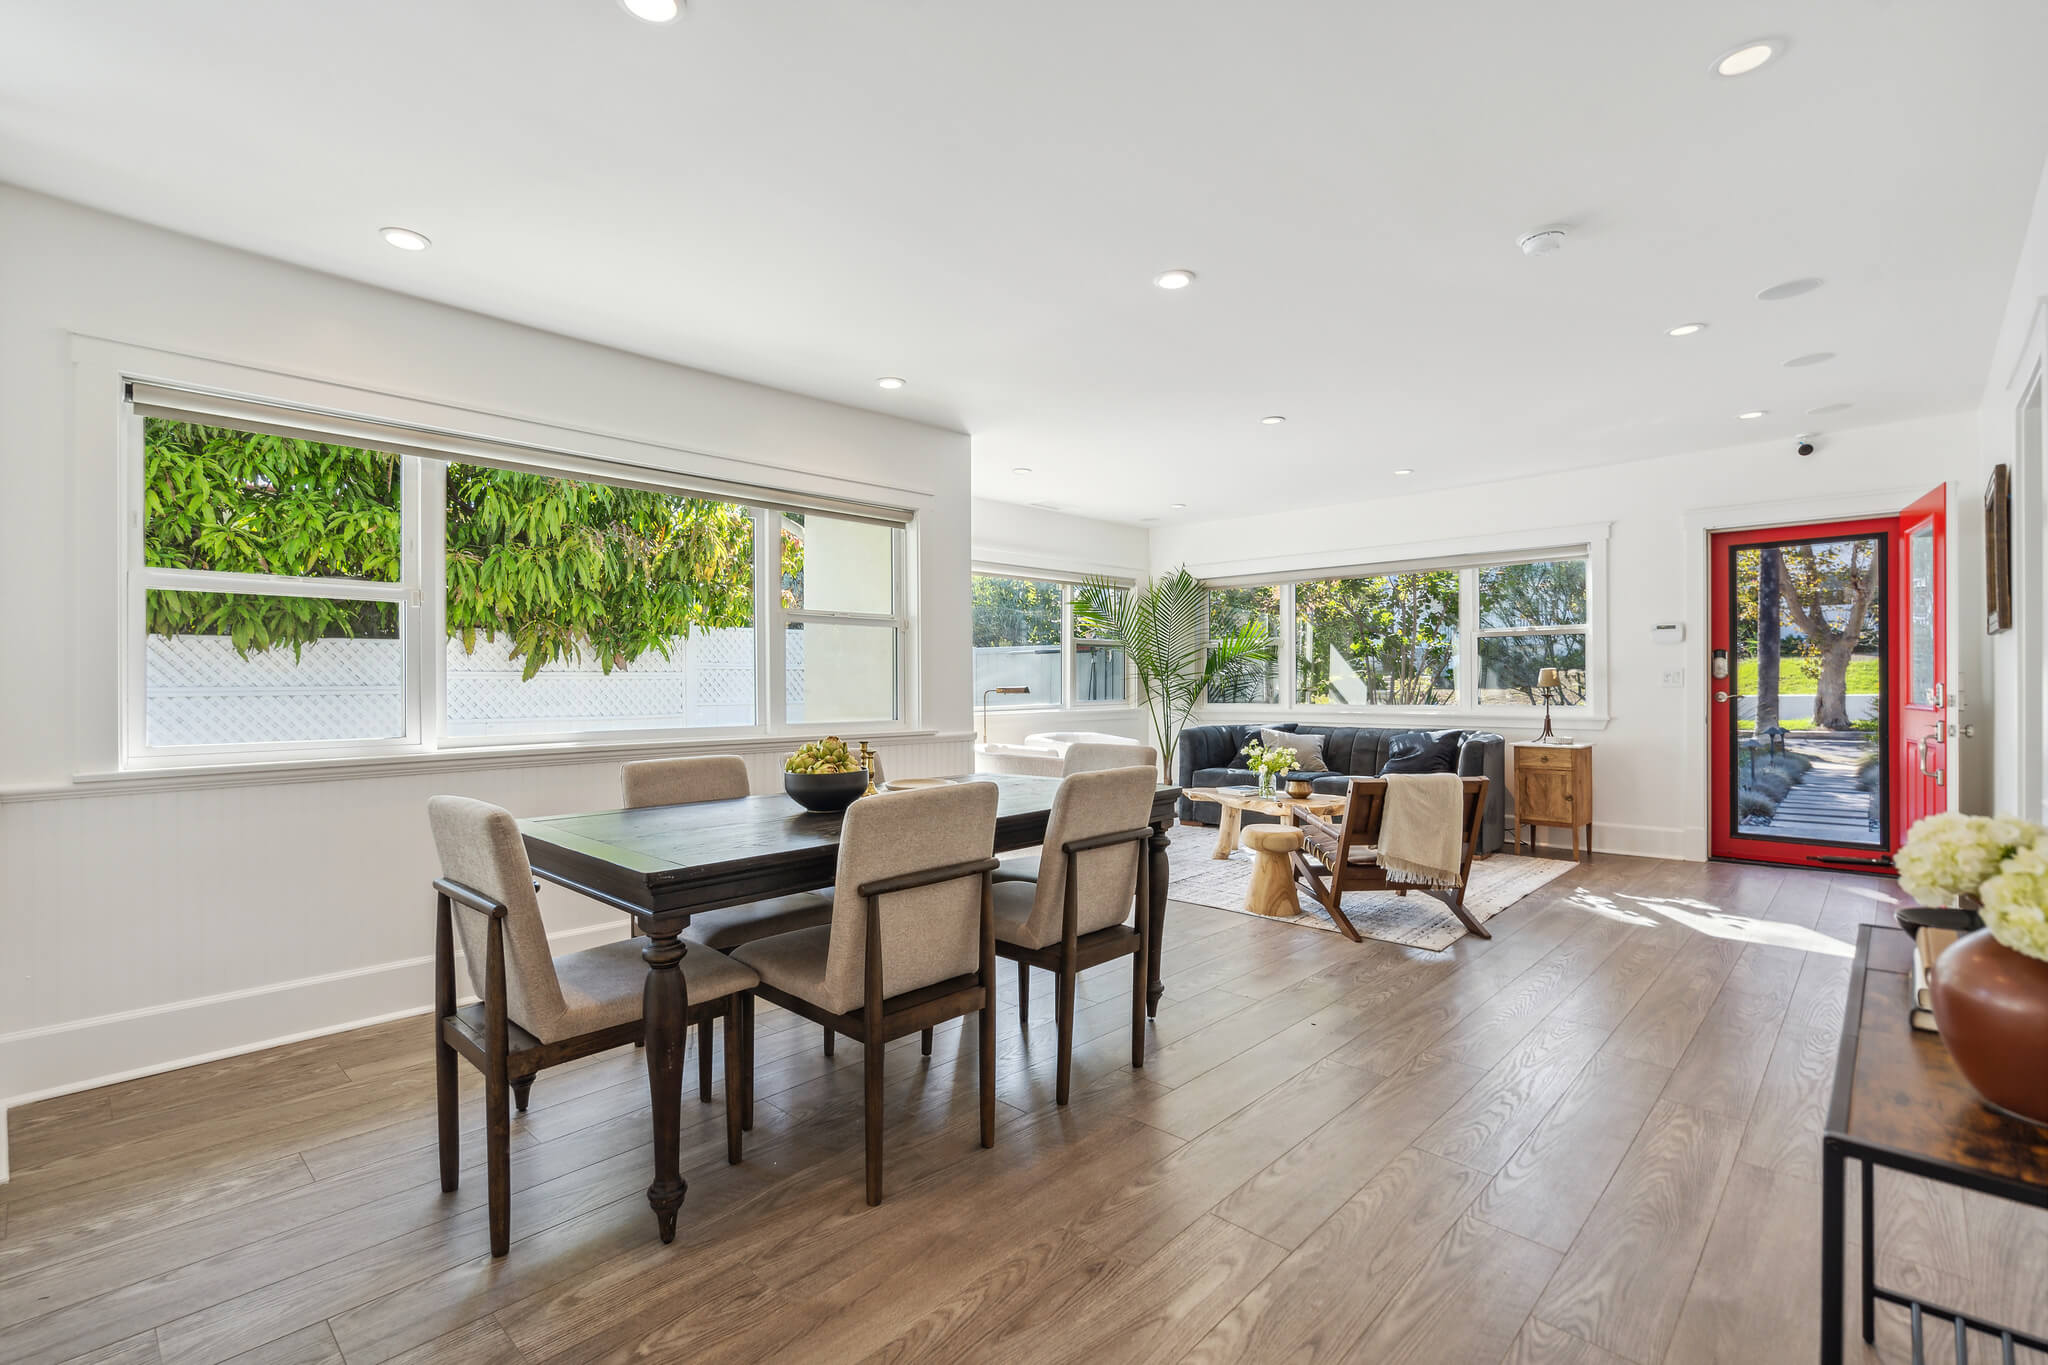 real estate photo of dining room and living room in Los Angeles